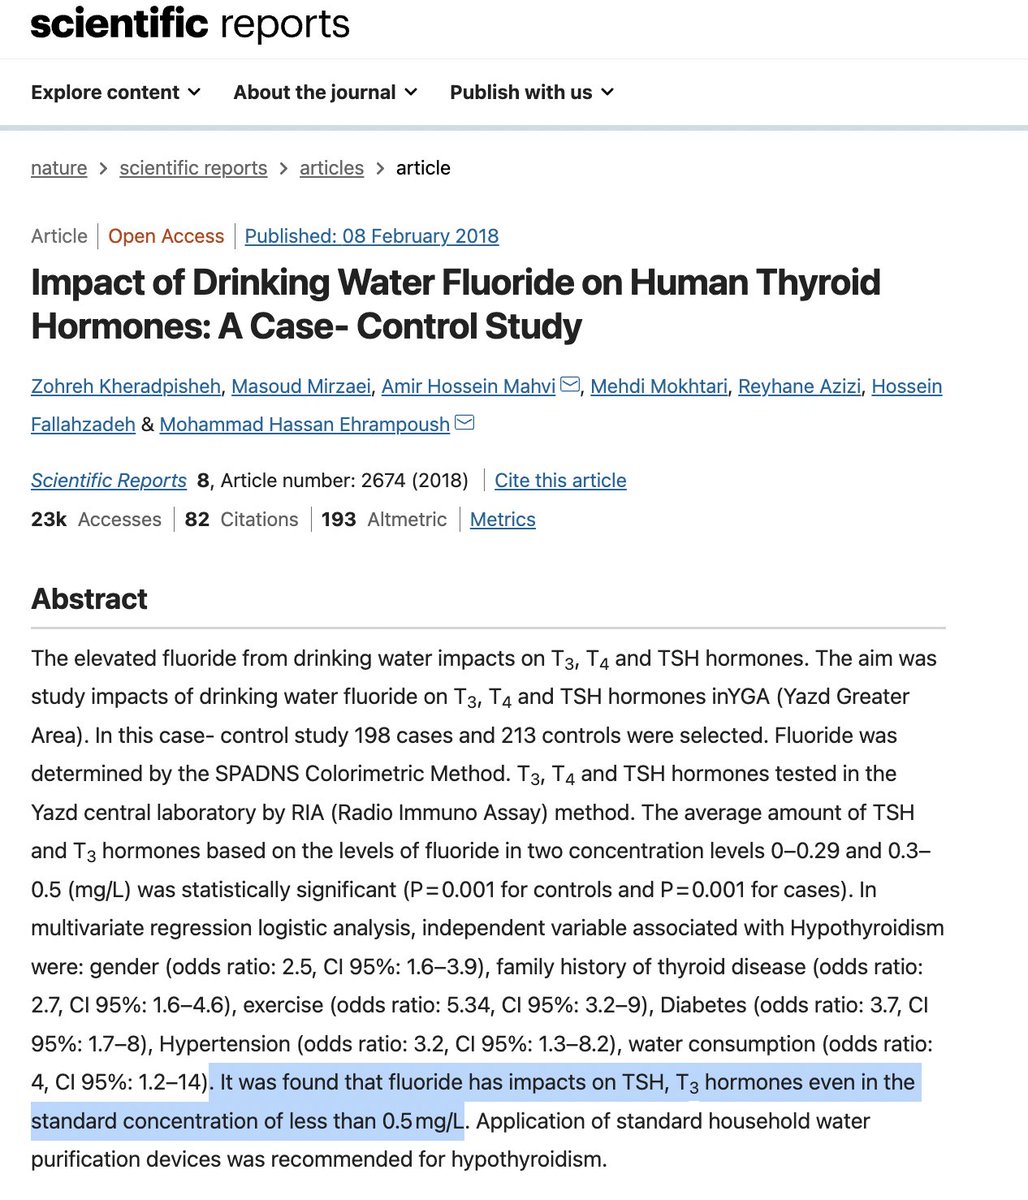 Women are 5-8 times more likely than men to have thyroid problems. During #NWHW, let's demand that our water supply is free from harmful fluoride chemicals that can negatively impact our thyroid health. @Greenbaywater @MayorGenrich @SatyaForMadison @SenatorBaldwin @SenRonJohnson